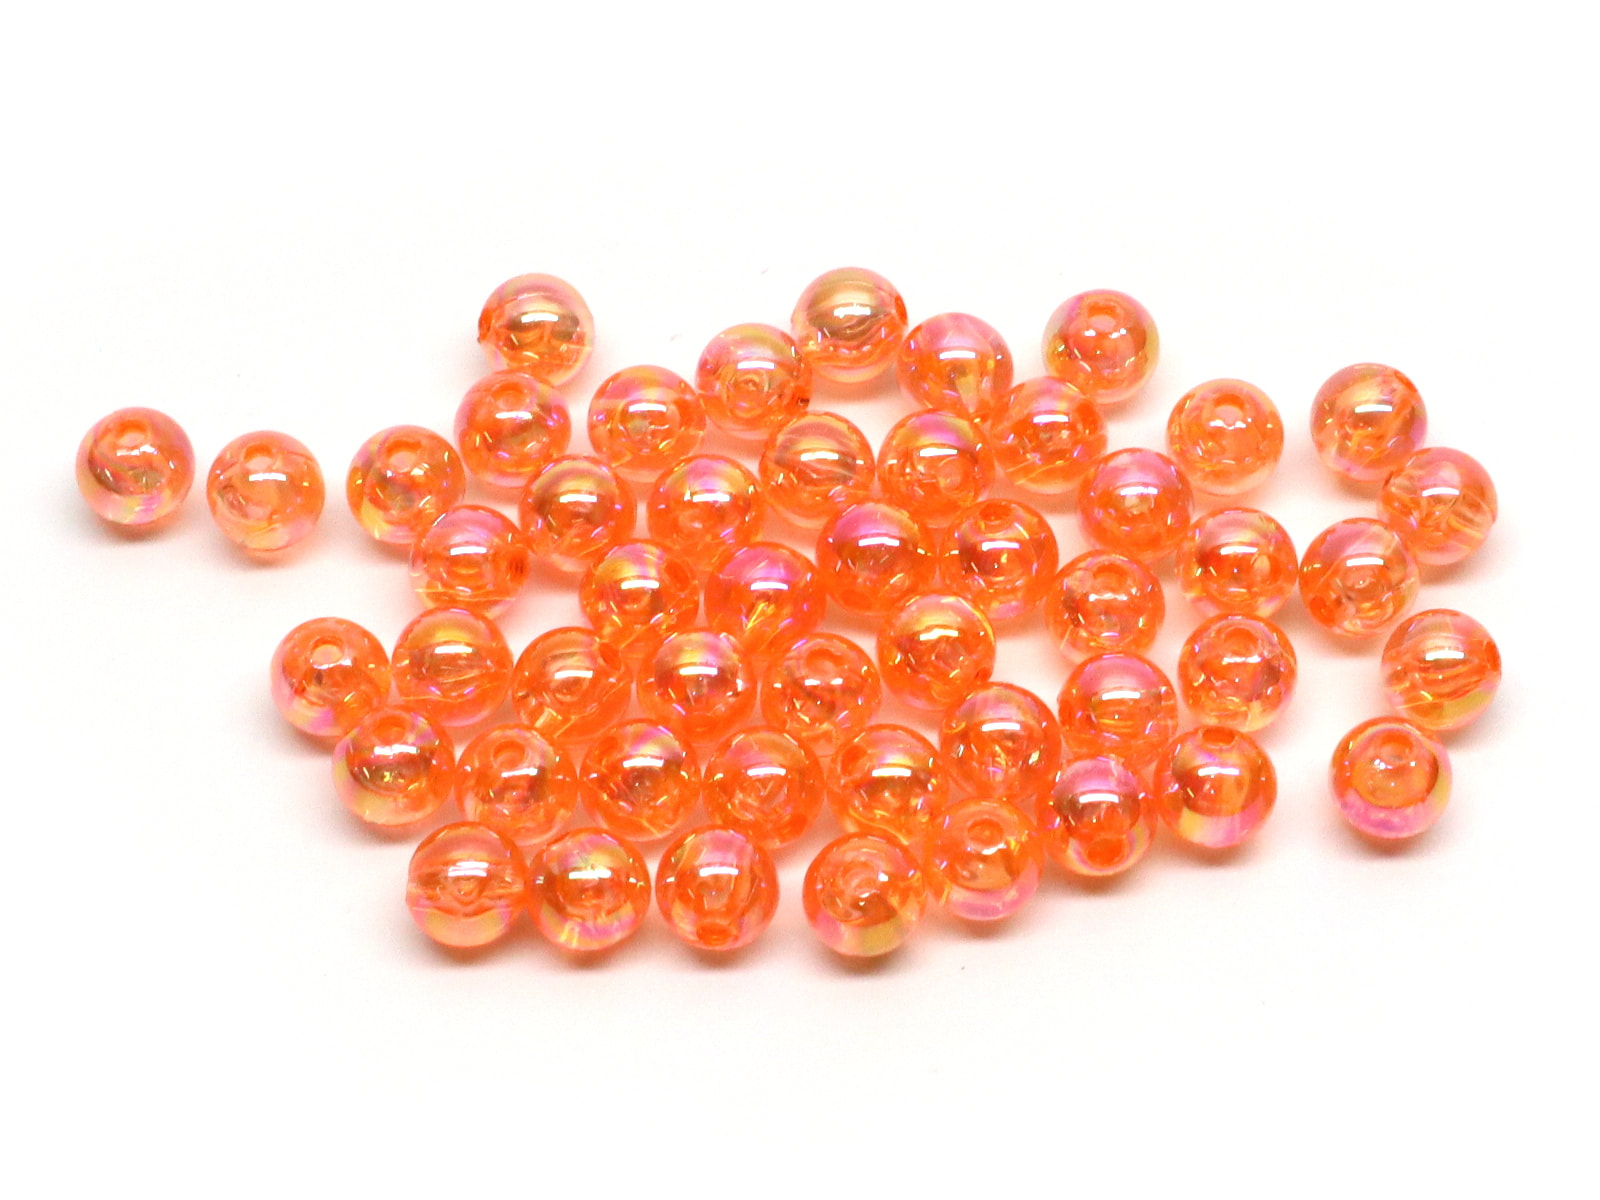 Harmony Fishing - Holographic Beads for Fishing Rigs, Baits & Lures (50 Pack )